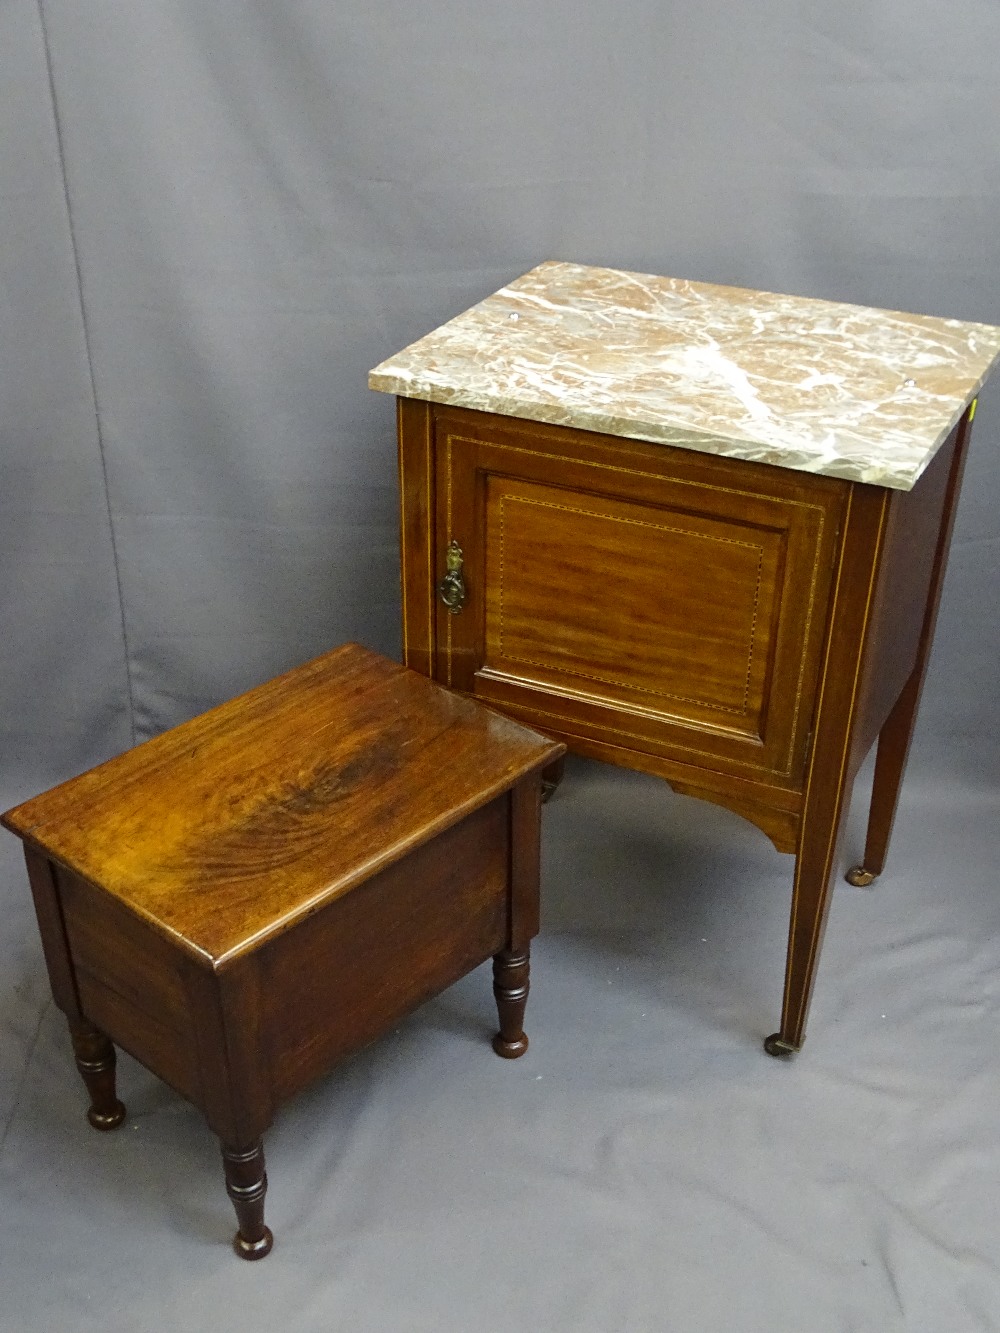 INLAID MAHOGANY WASH STAND with pink marble top and a lidded mahogany slipper box on turned